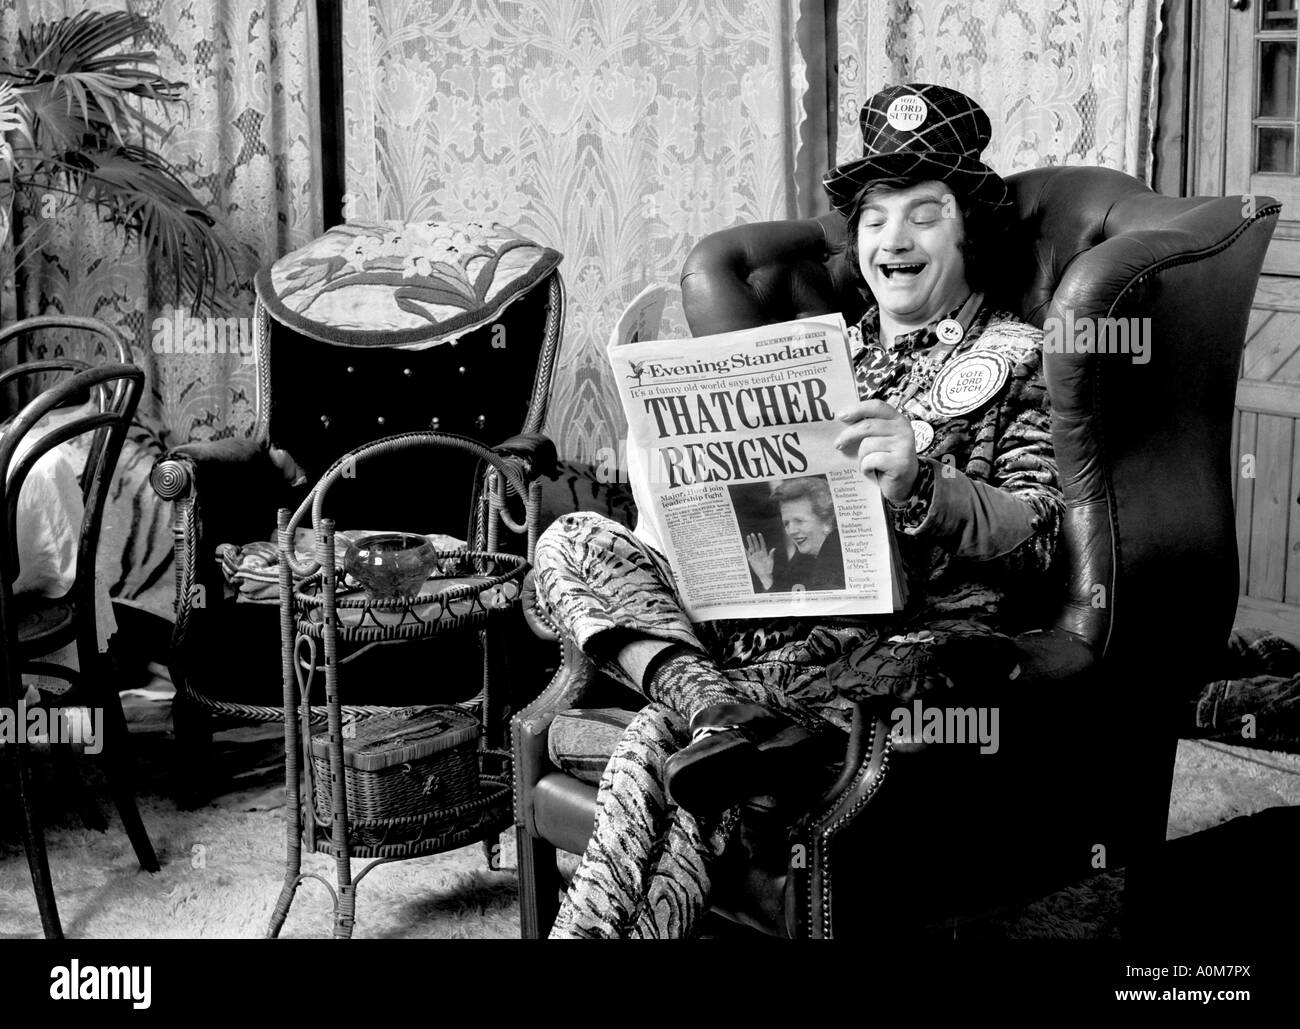 Screaming Lord Sutch at his home reading news of Mrs Thatchers resignation. Stock Photo